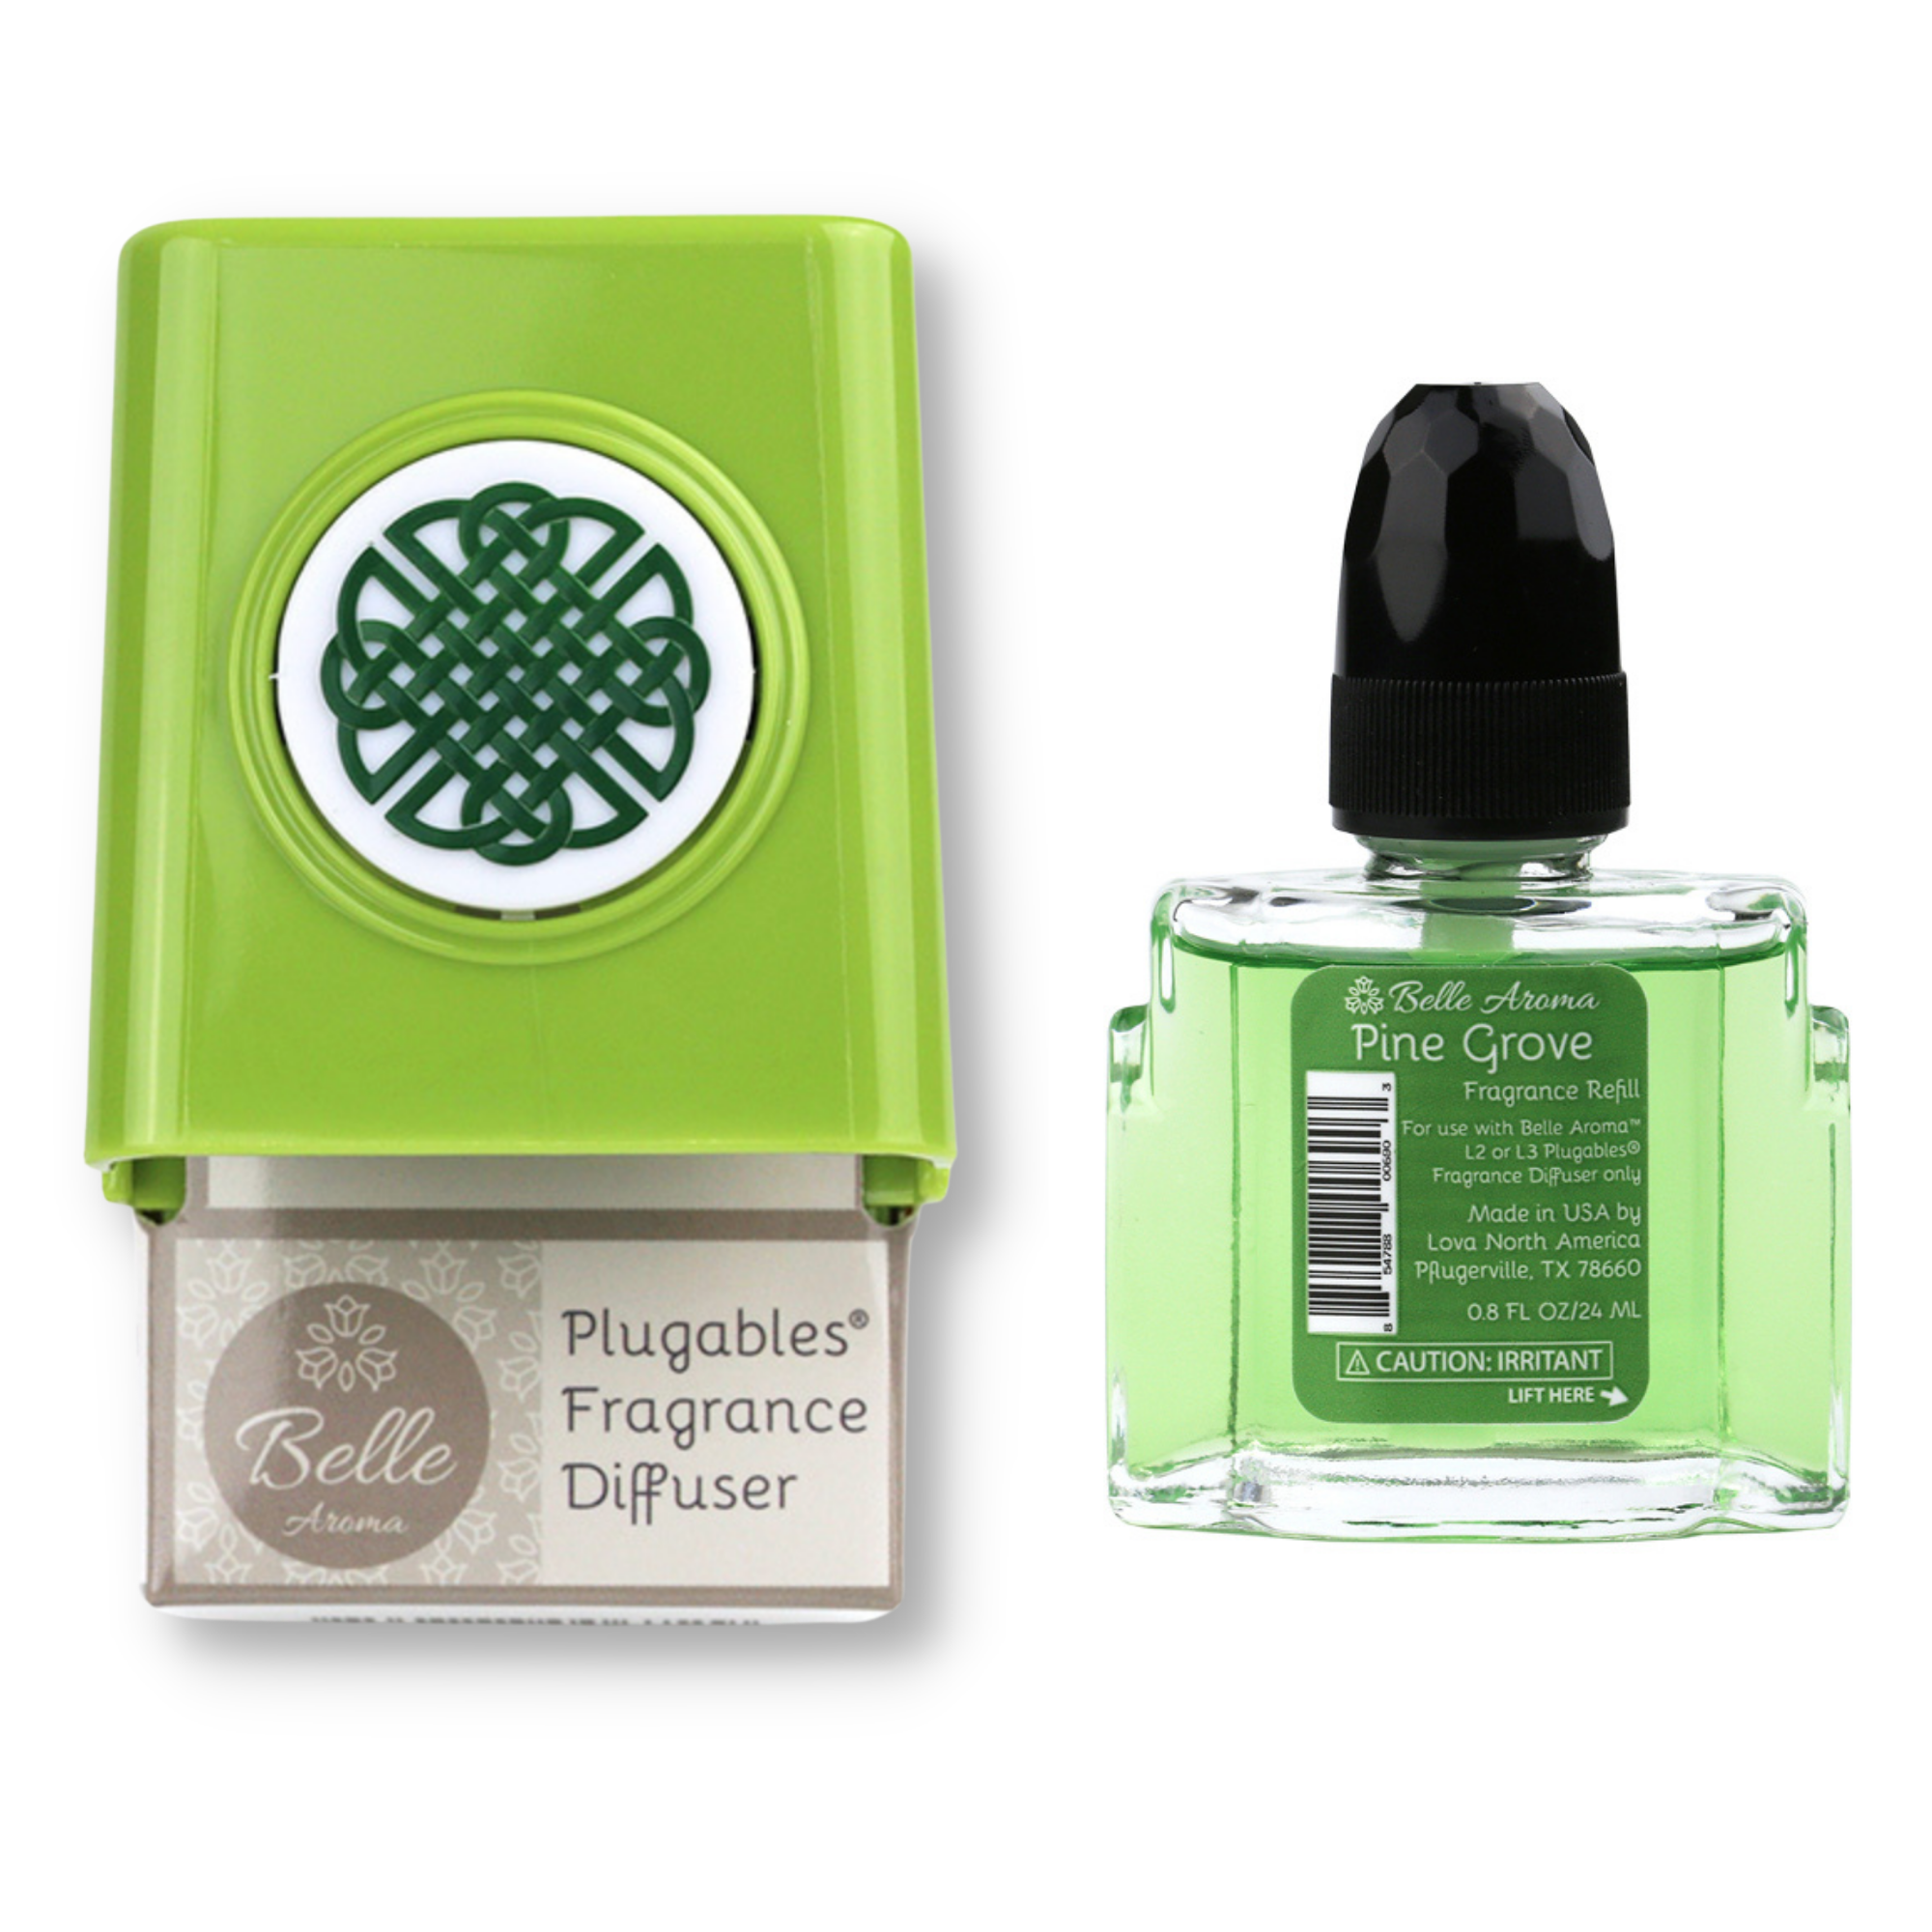 Celtic Knot Medallion Plugables® Plugin Electric Scented Oil Diffuser - Granny Smith with Pine Grove Fragrance Oil Home Fragrance Accessories